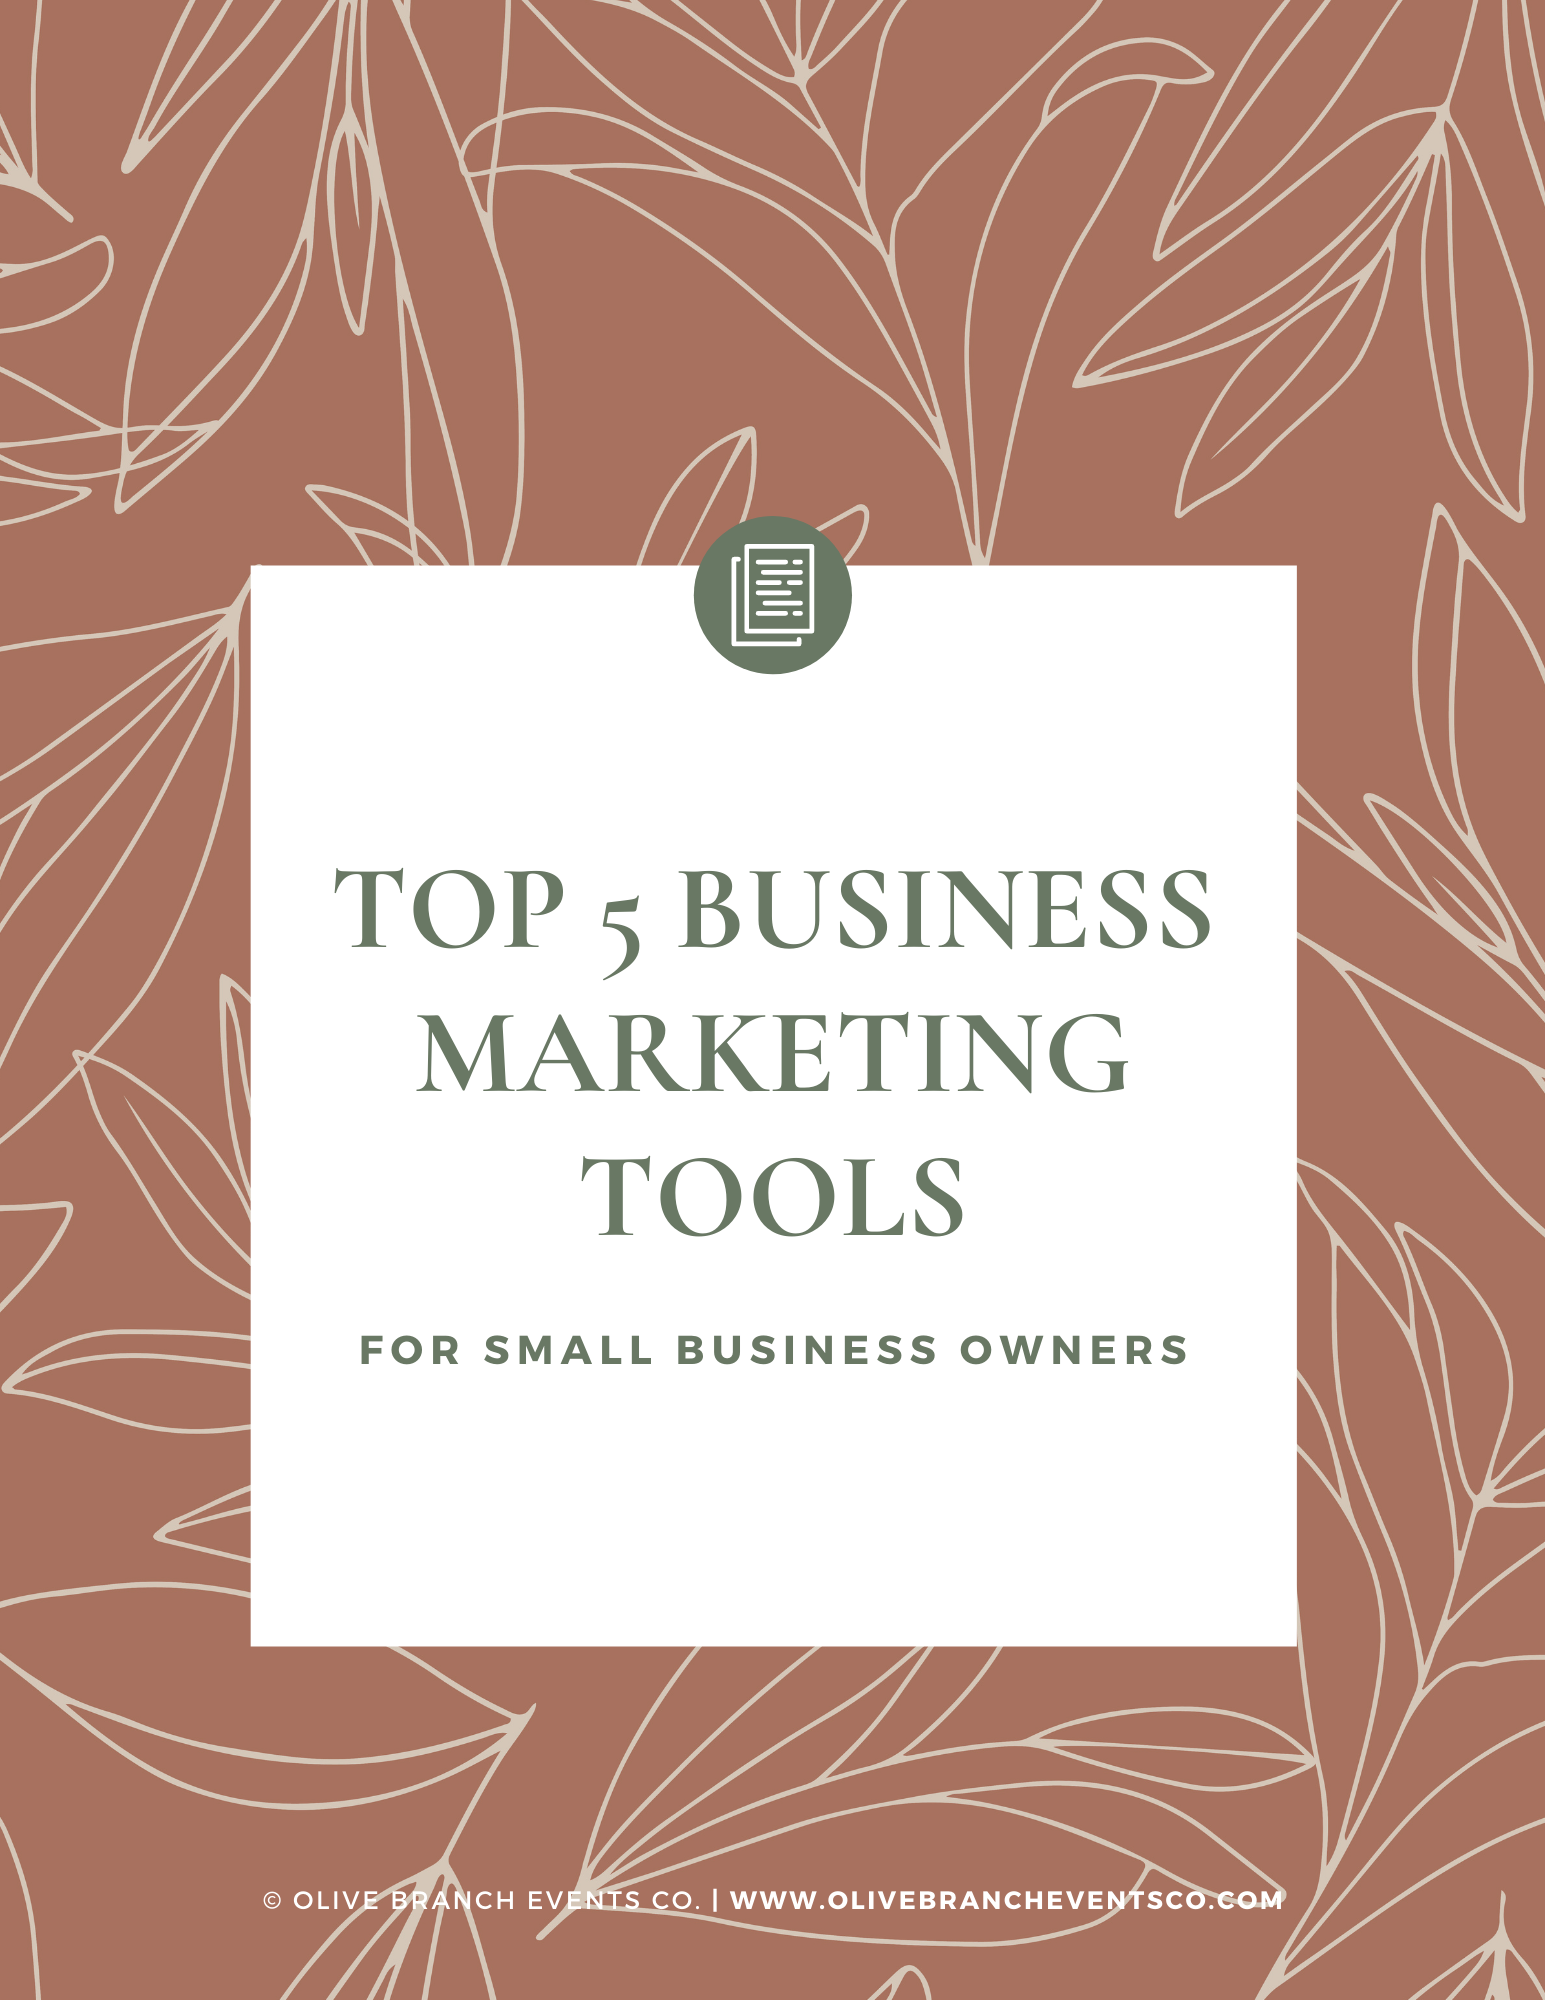 Top 5 Business Marketing Tools for Small Business Owners & Wedding Professionals